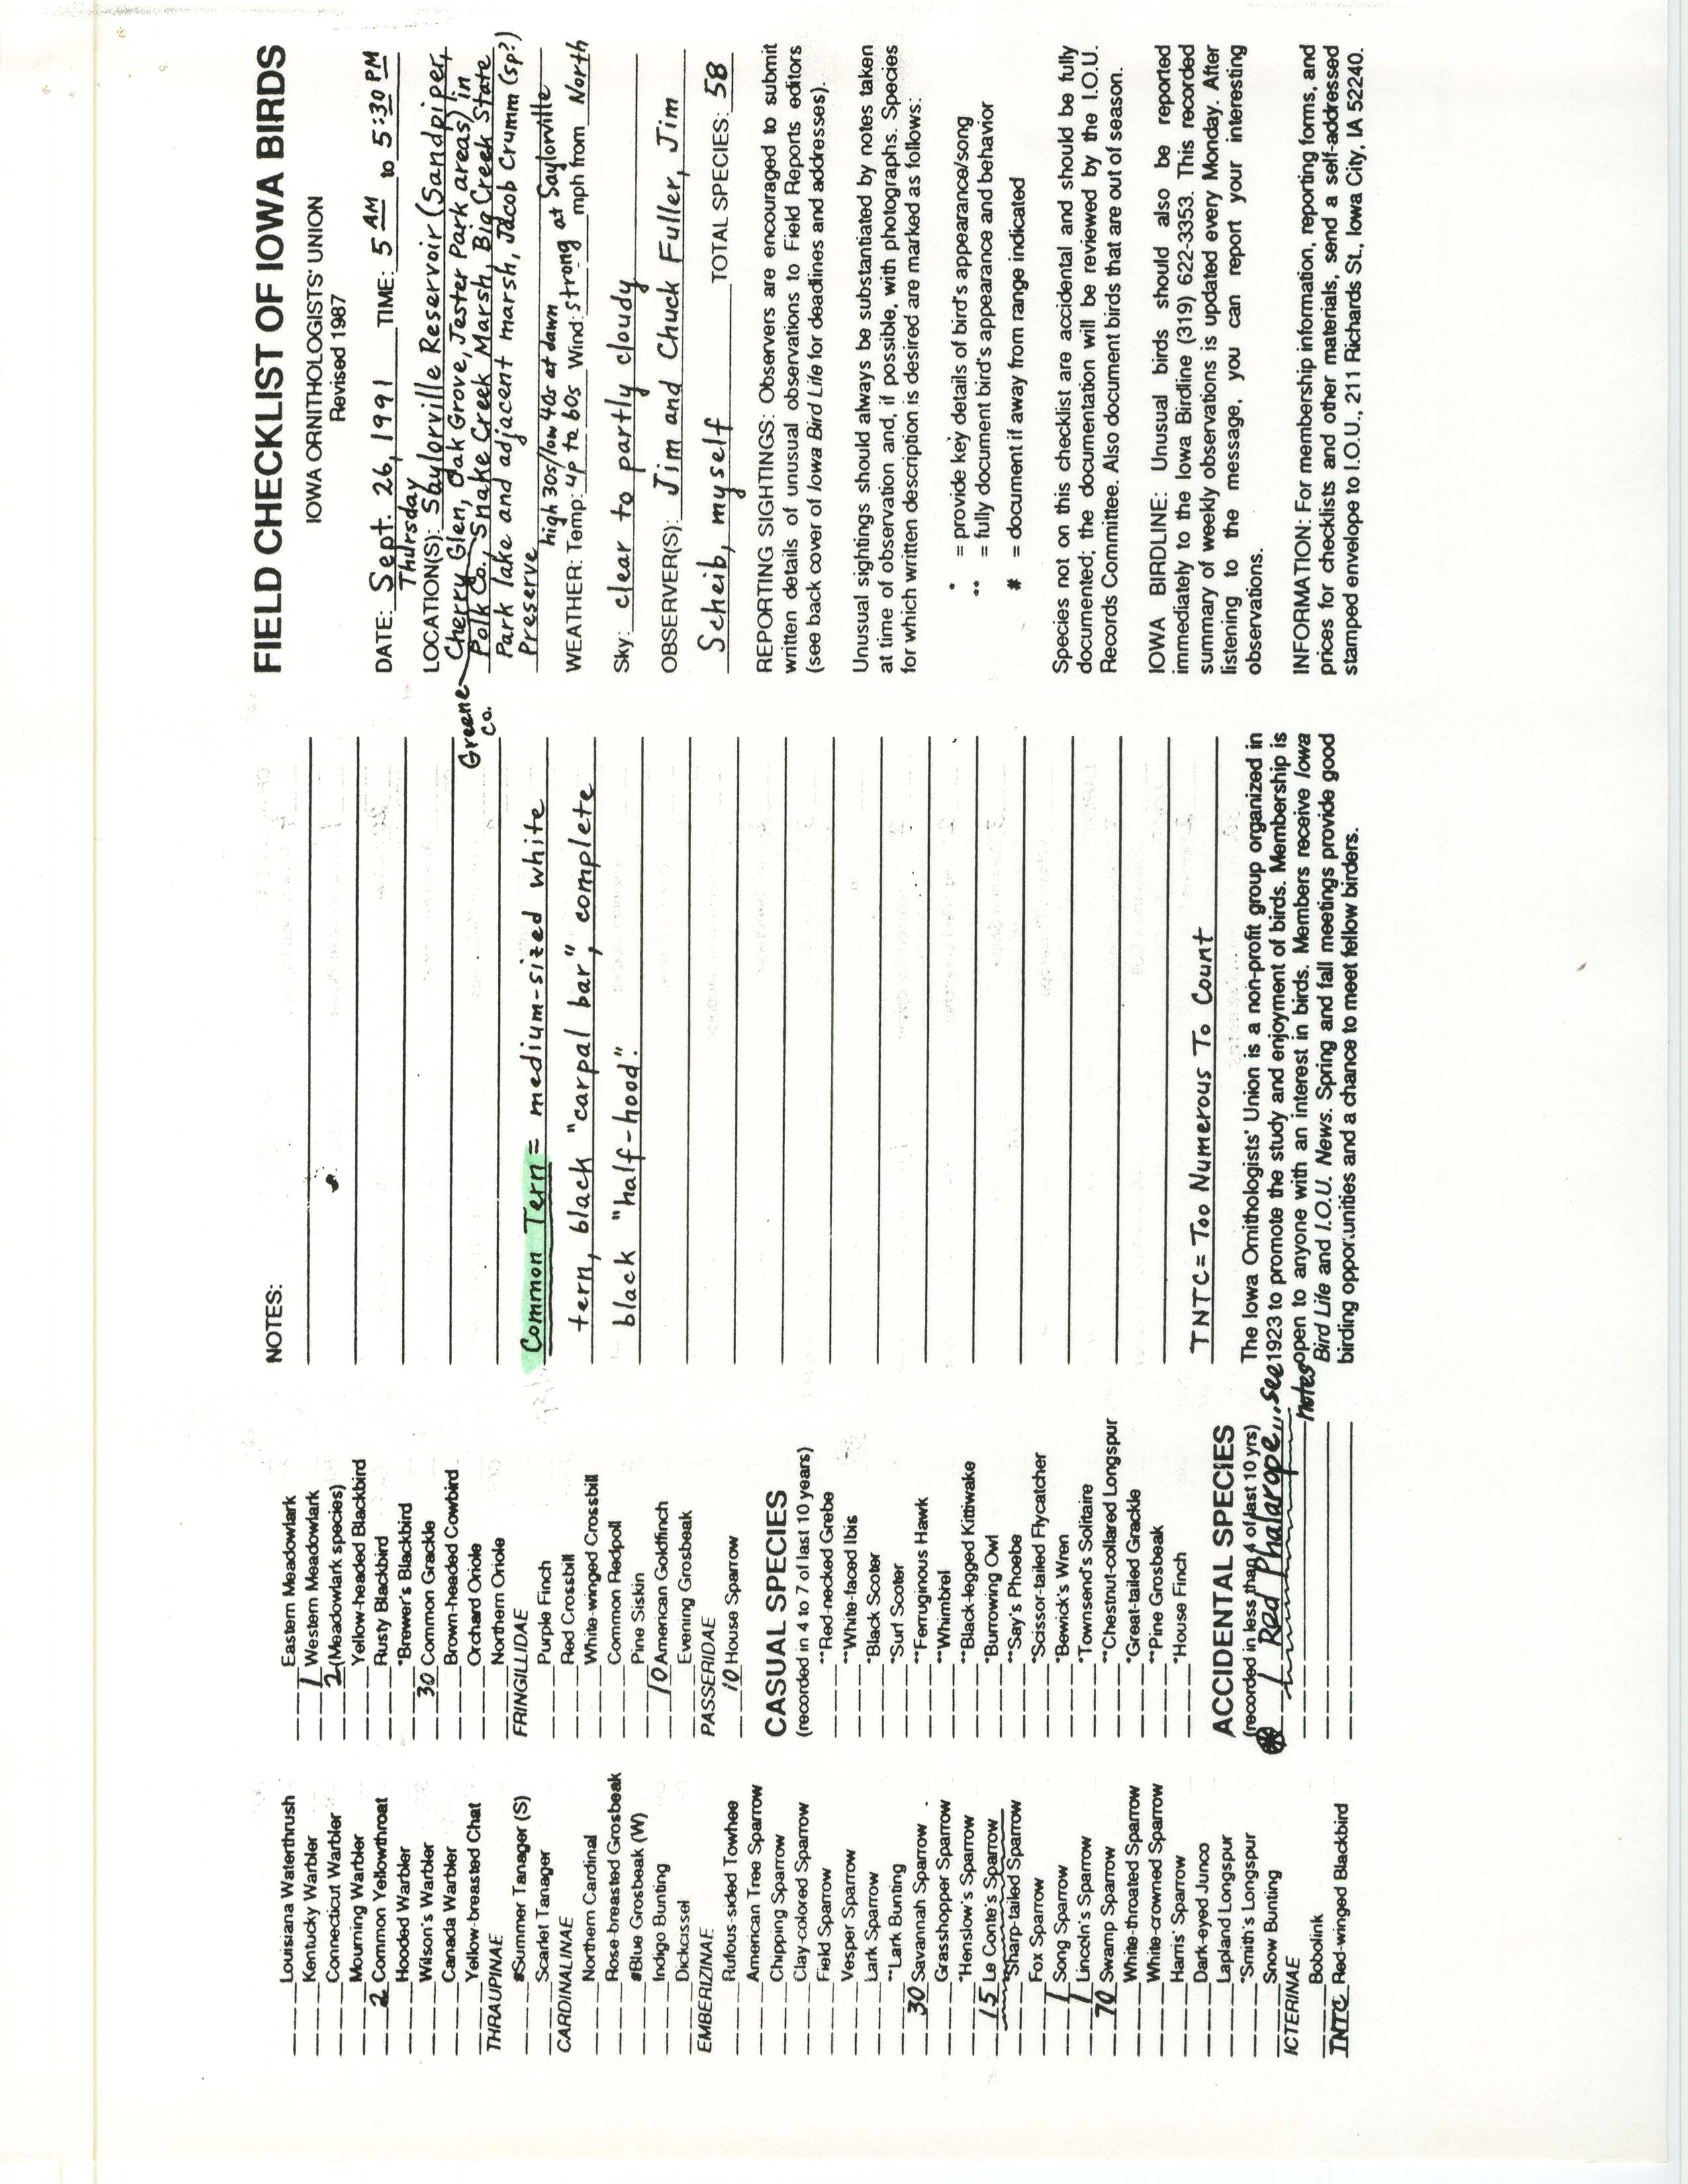 Field checklist of Iowa birds contributed by Randall Pinkston, September 26, 1991